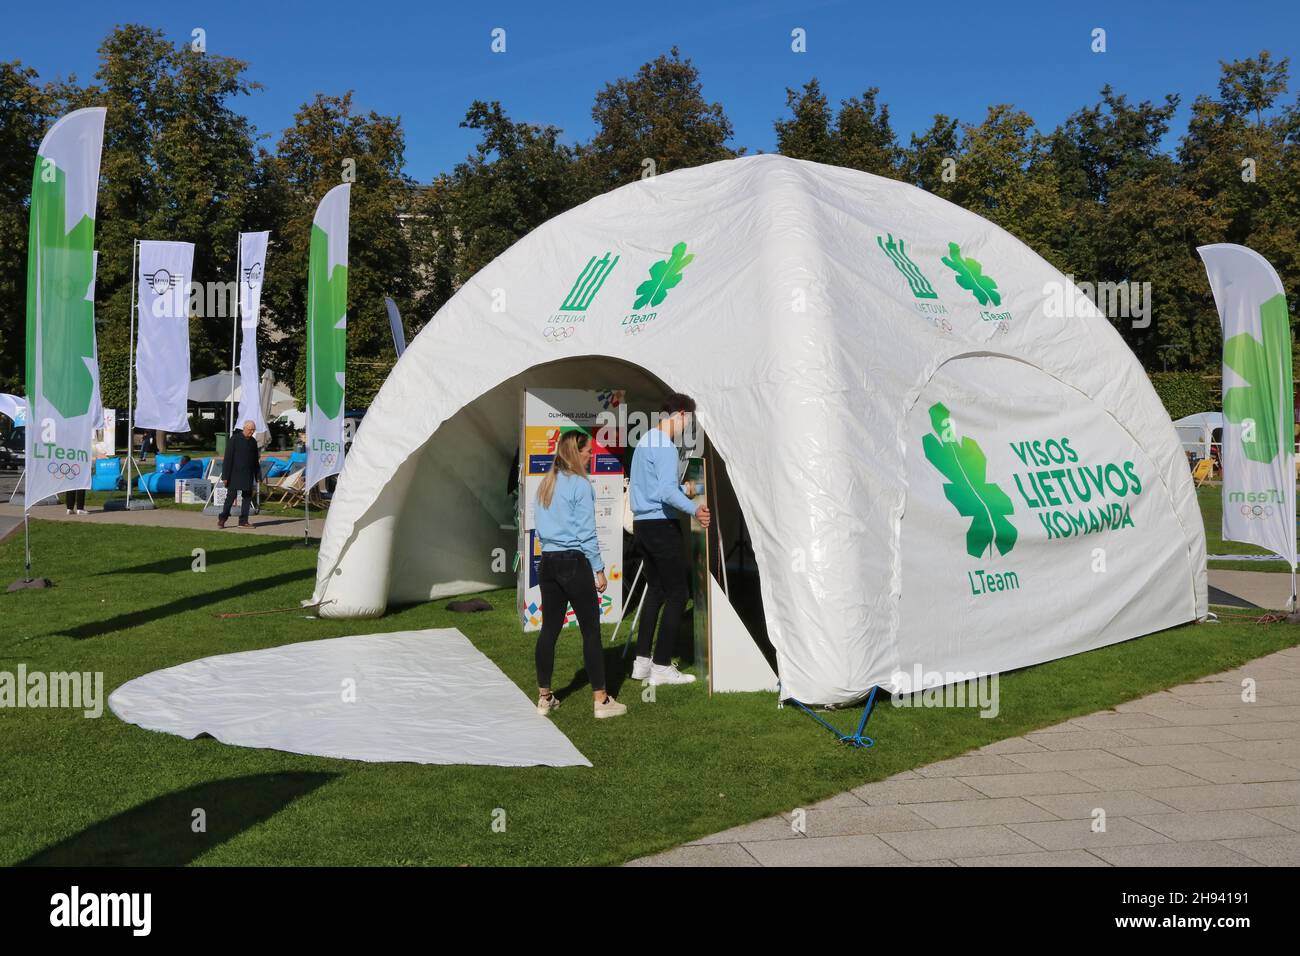 VILNIUS, LITHUANIA - SEPTEMBER 09, 2021: Information point of the Lithuanian Olympic team at the celebration dedicated to the capital of the republic Stock Photo